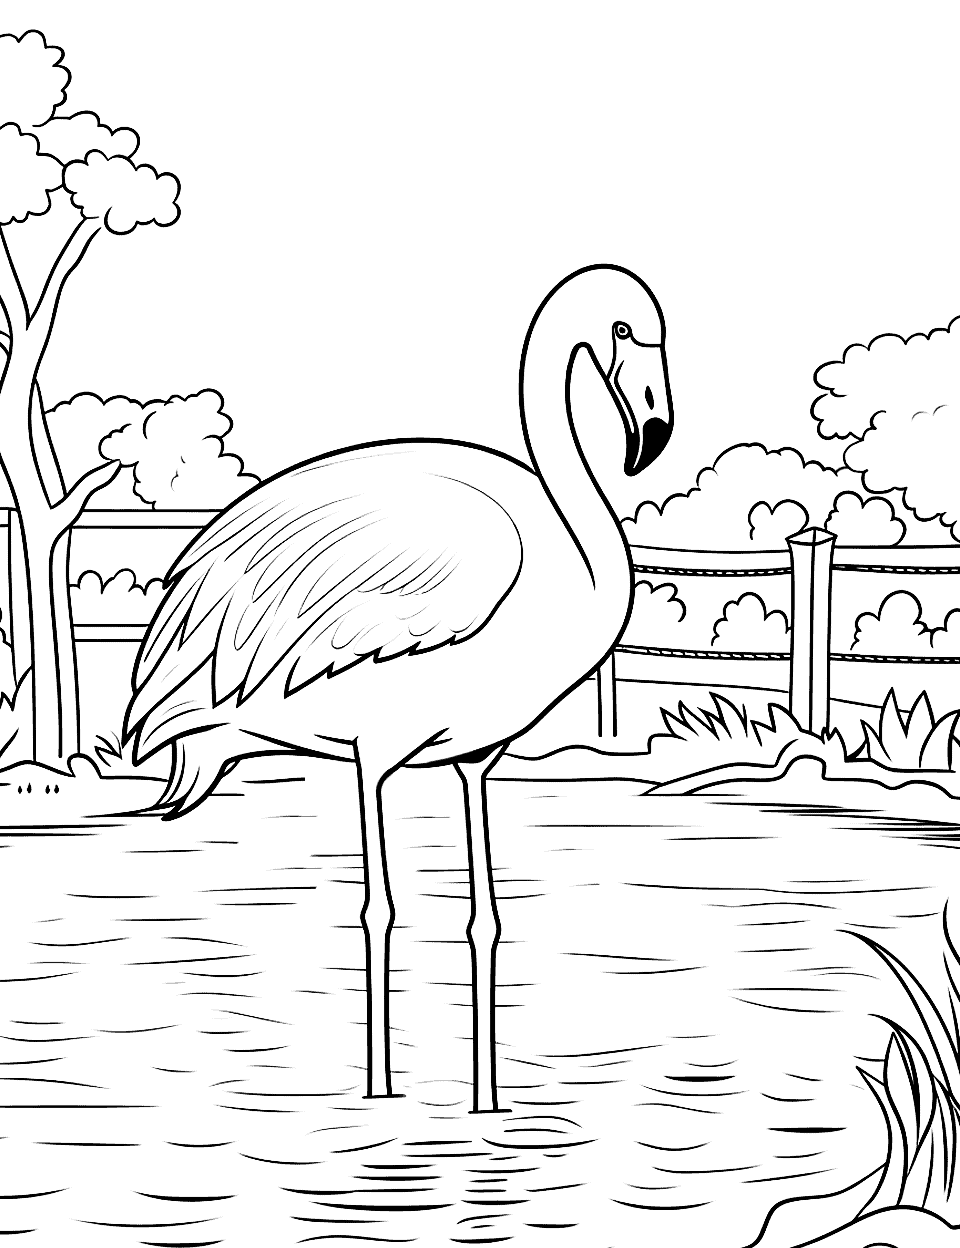 Flamingo at the Zoo Coloring Page - A simple scene of a flamingo in a zoo setting, with a fence and perhaps a small pond.